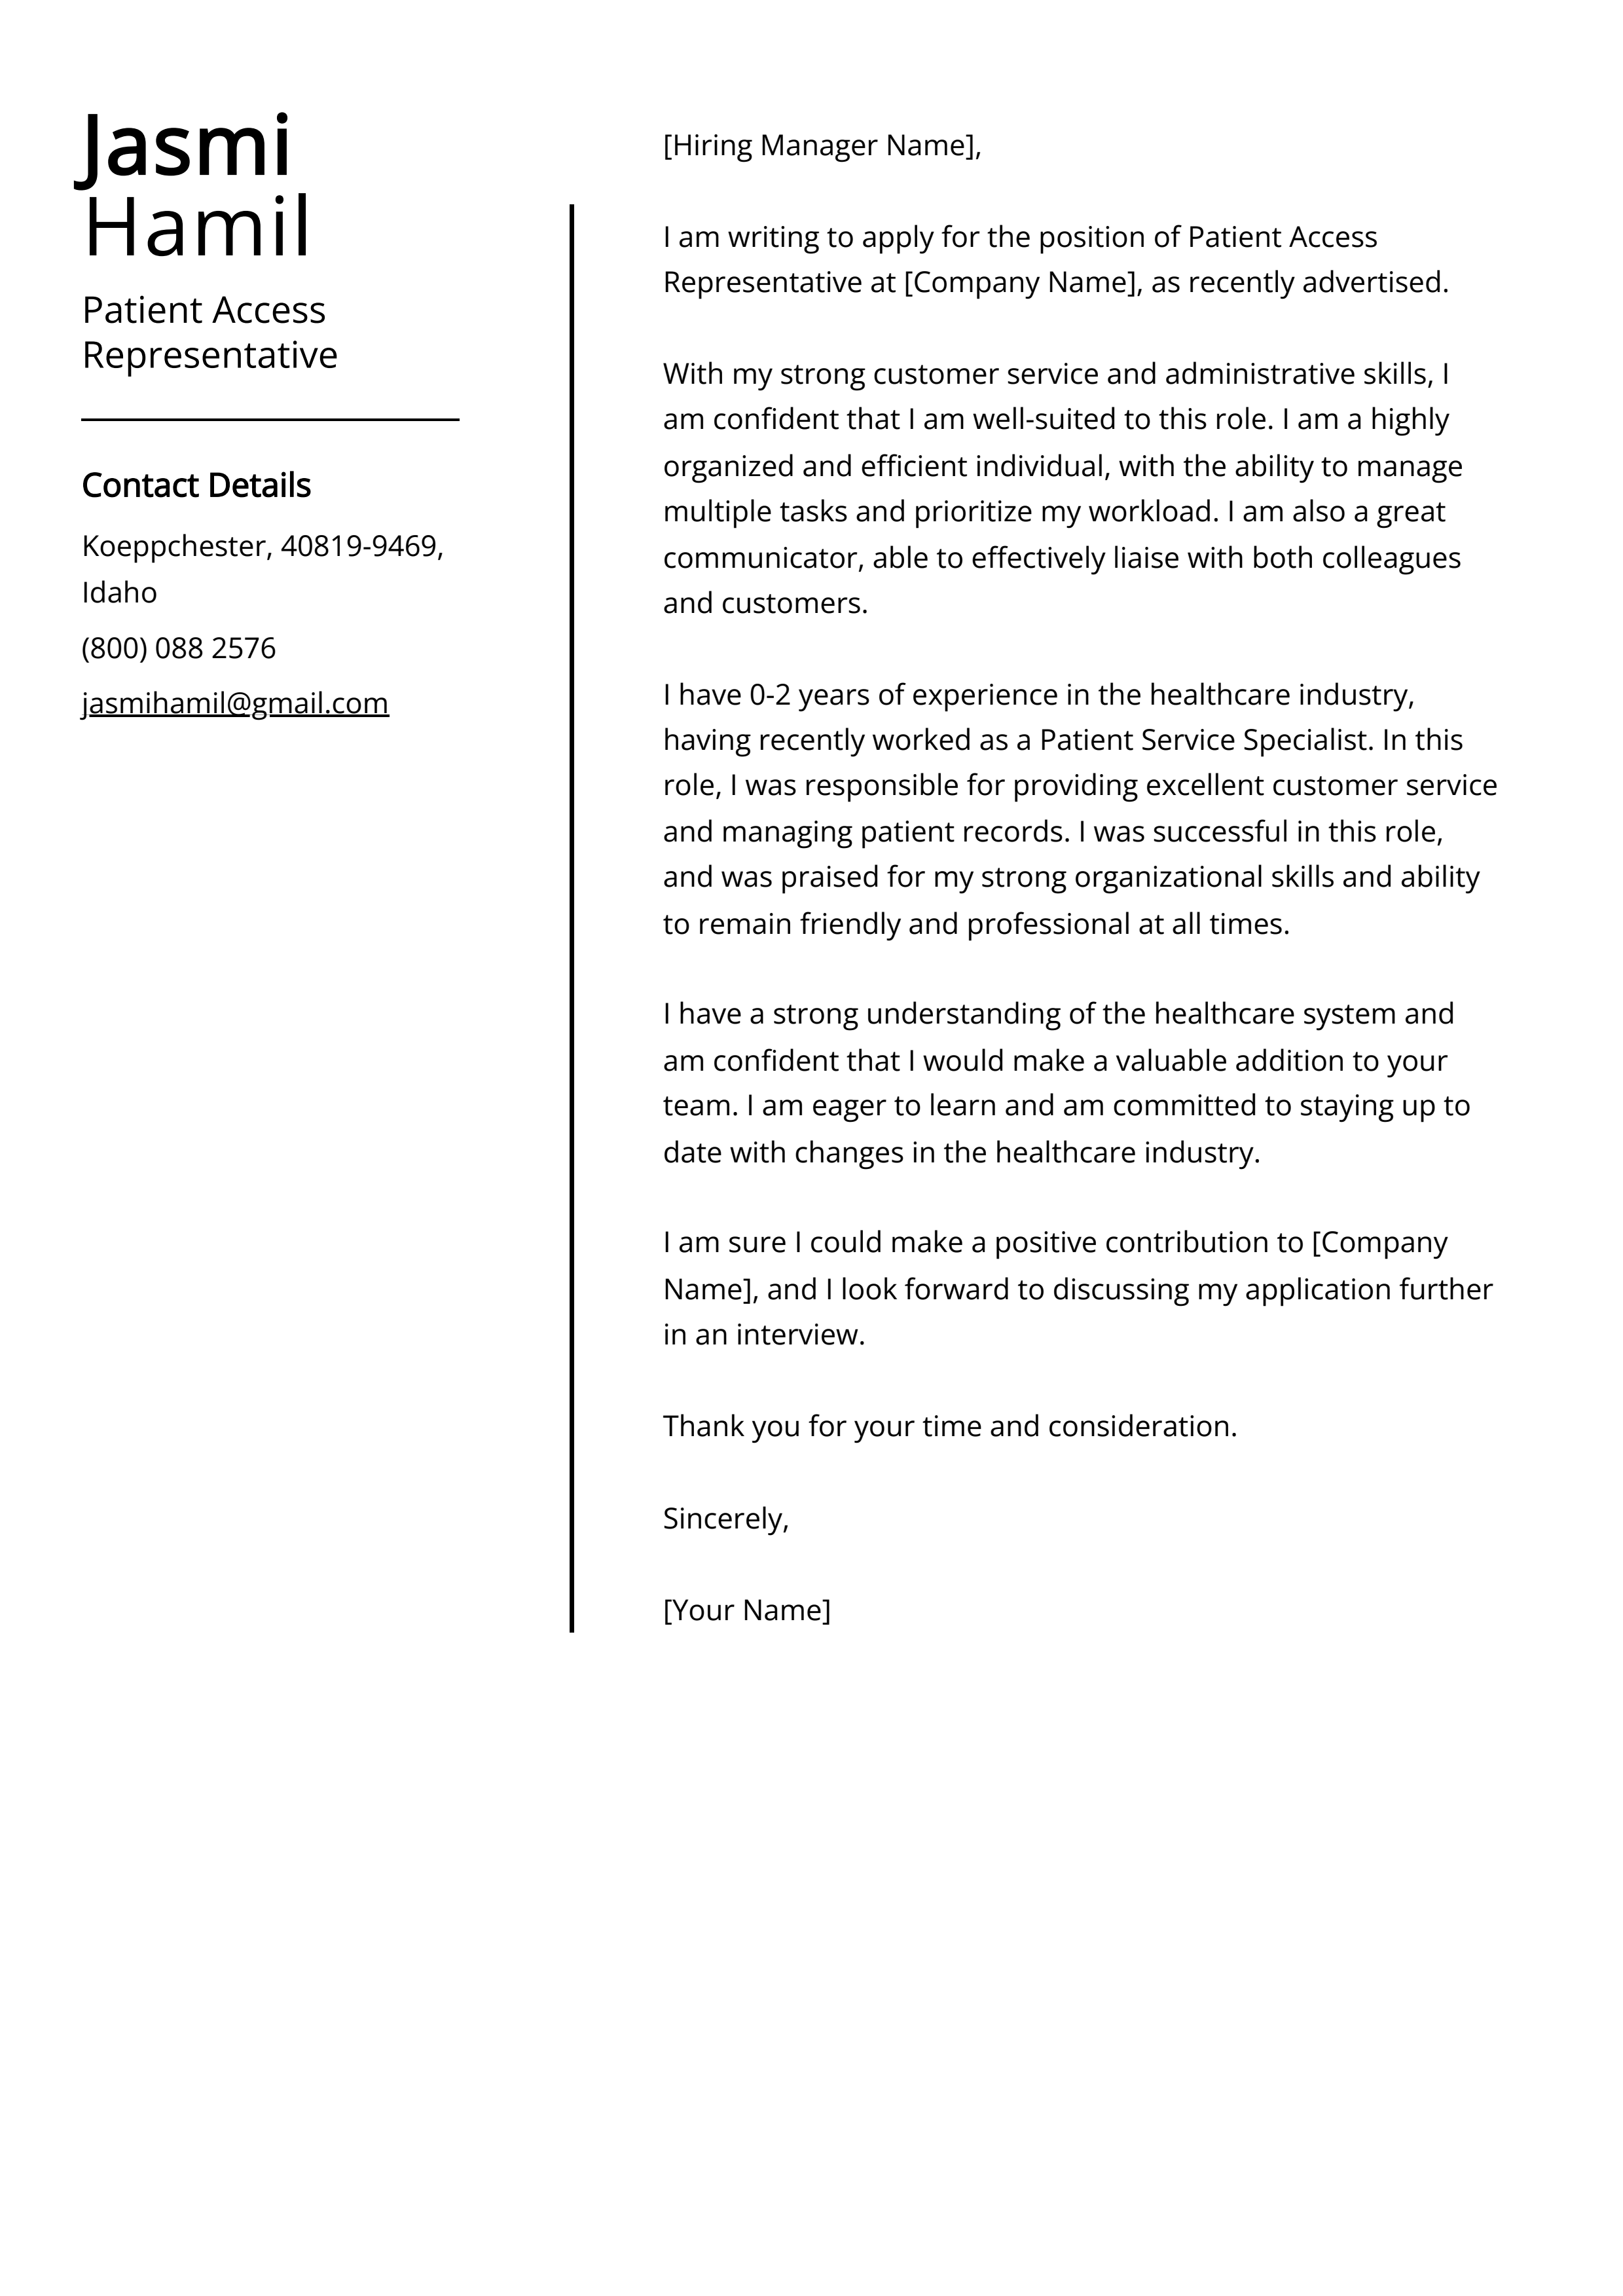 Patient Access Representative Cover Letter Example